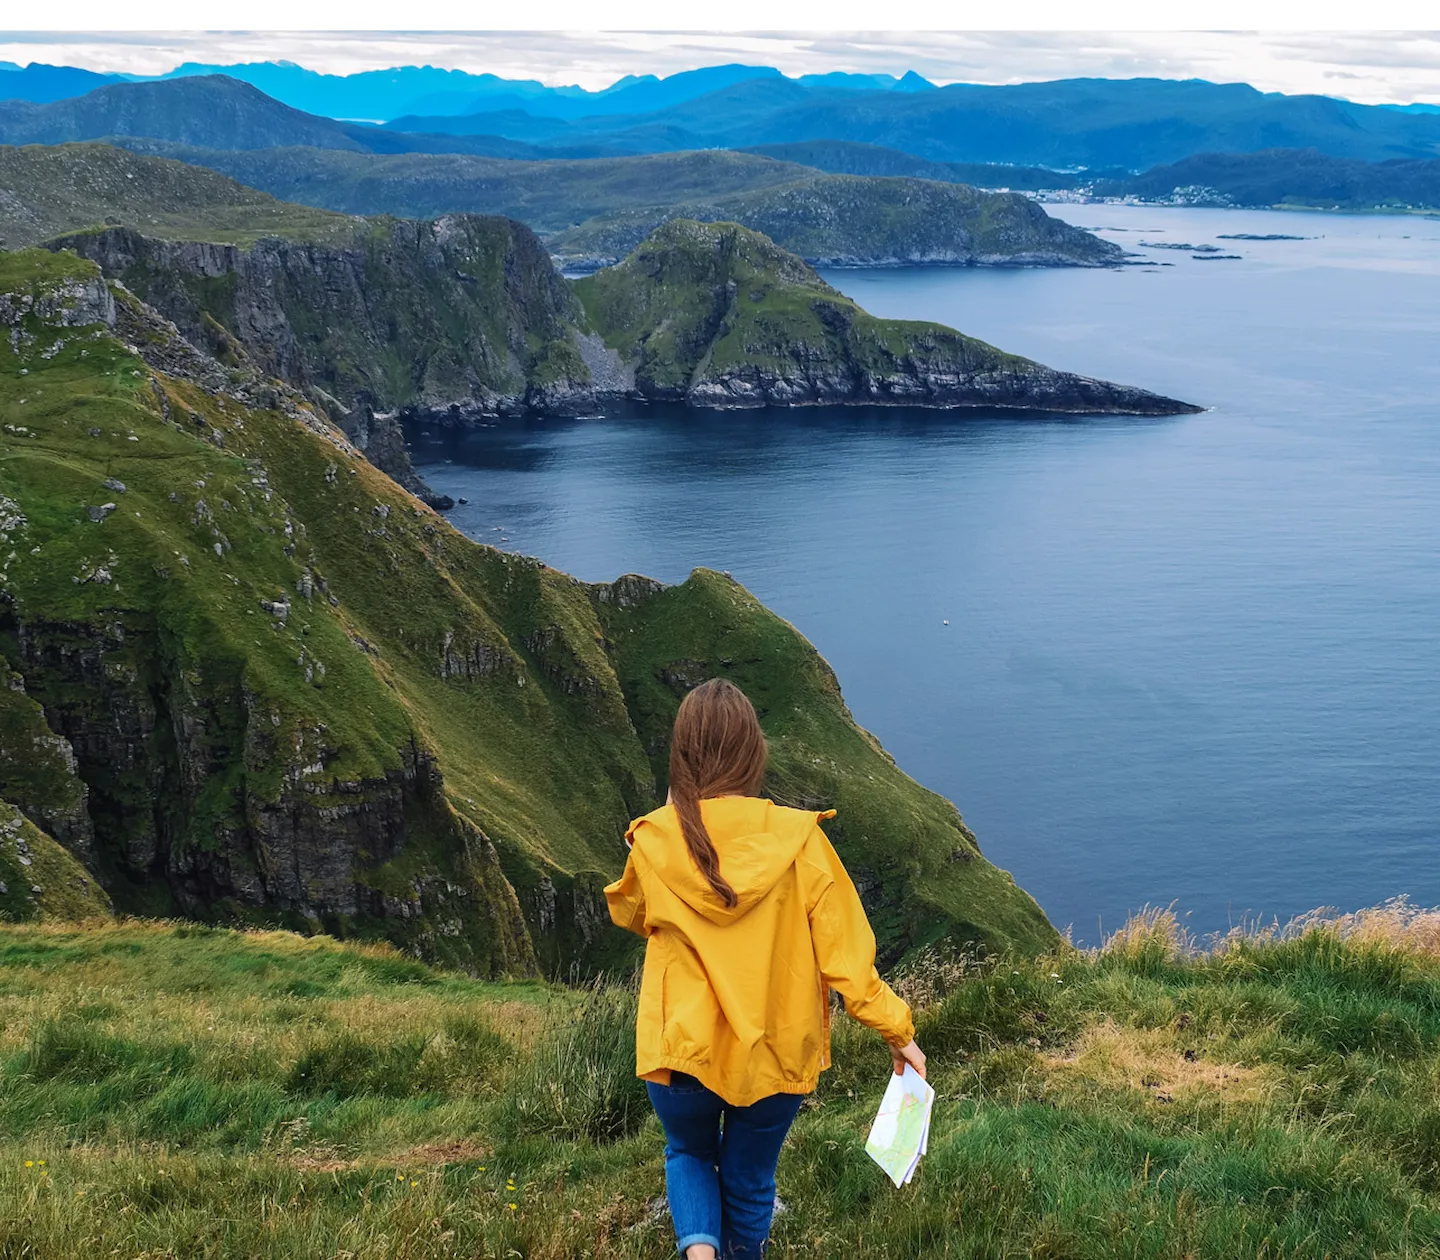 A person in a yellow jacket holds a map with a view of mountains and fjord